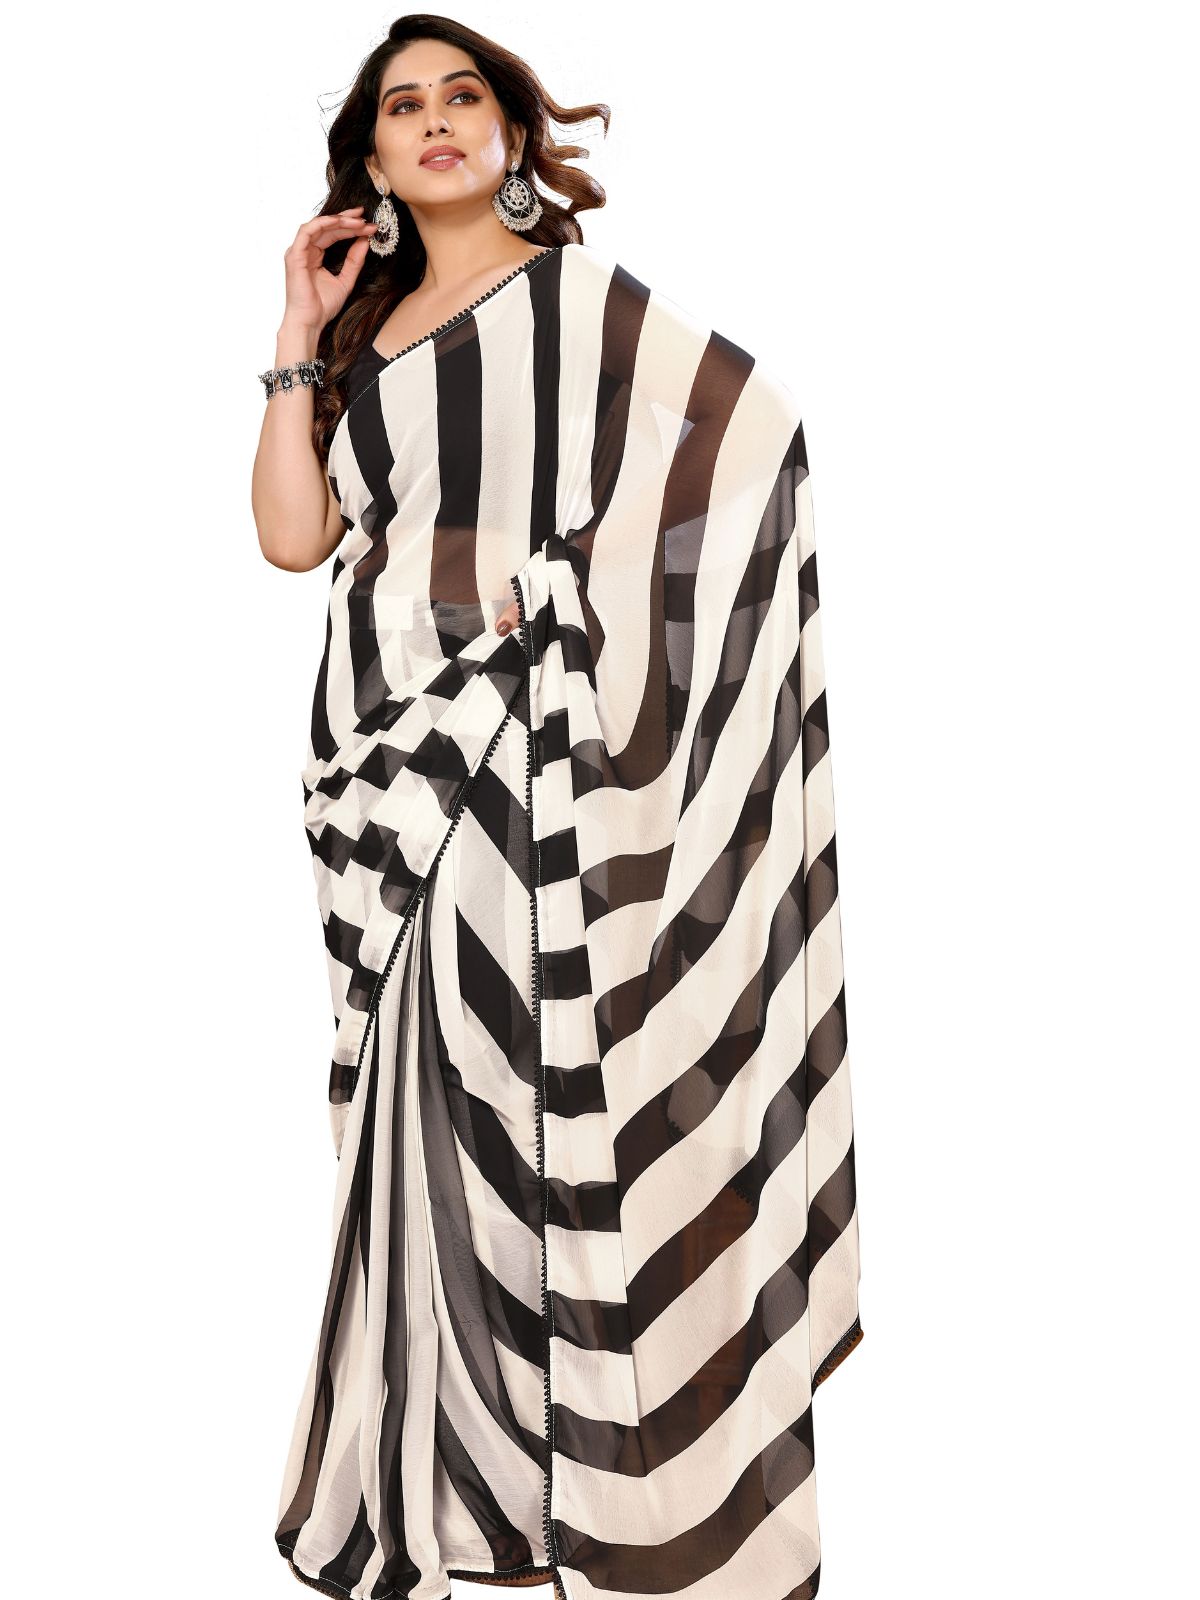 Odette Designer Black and White Printed Ready-to-Wear Saree with Unstitched Blouse for Women